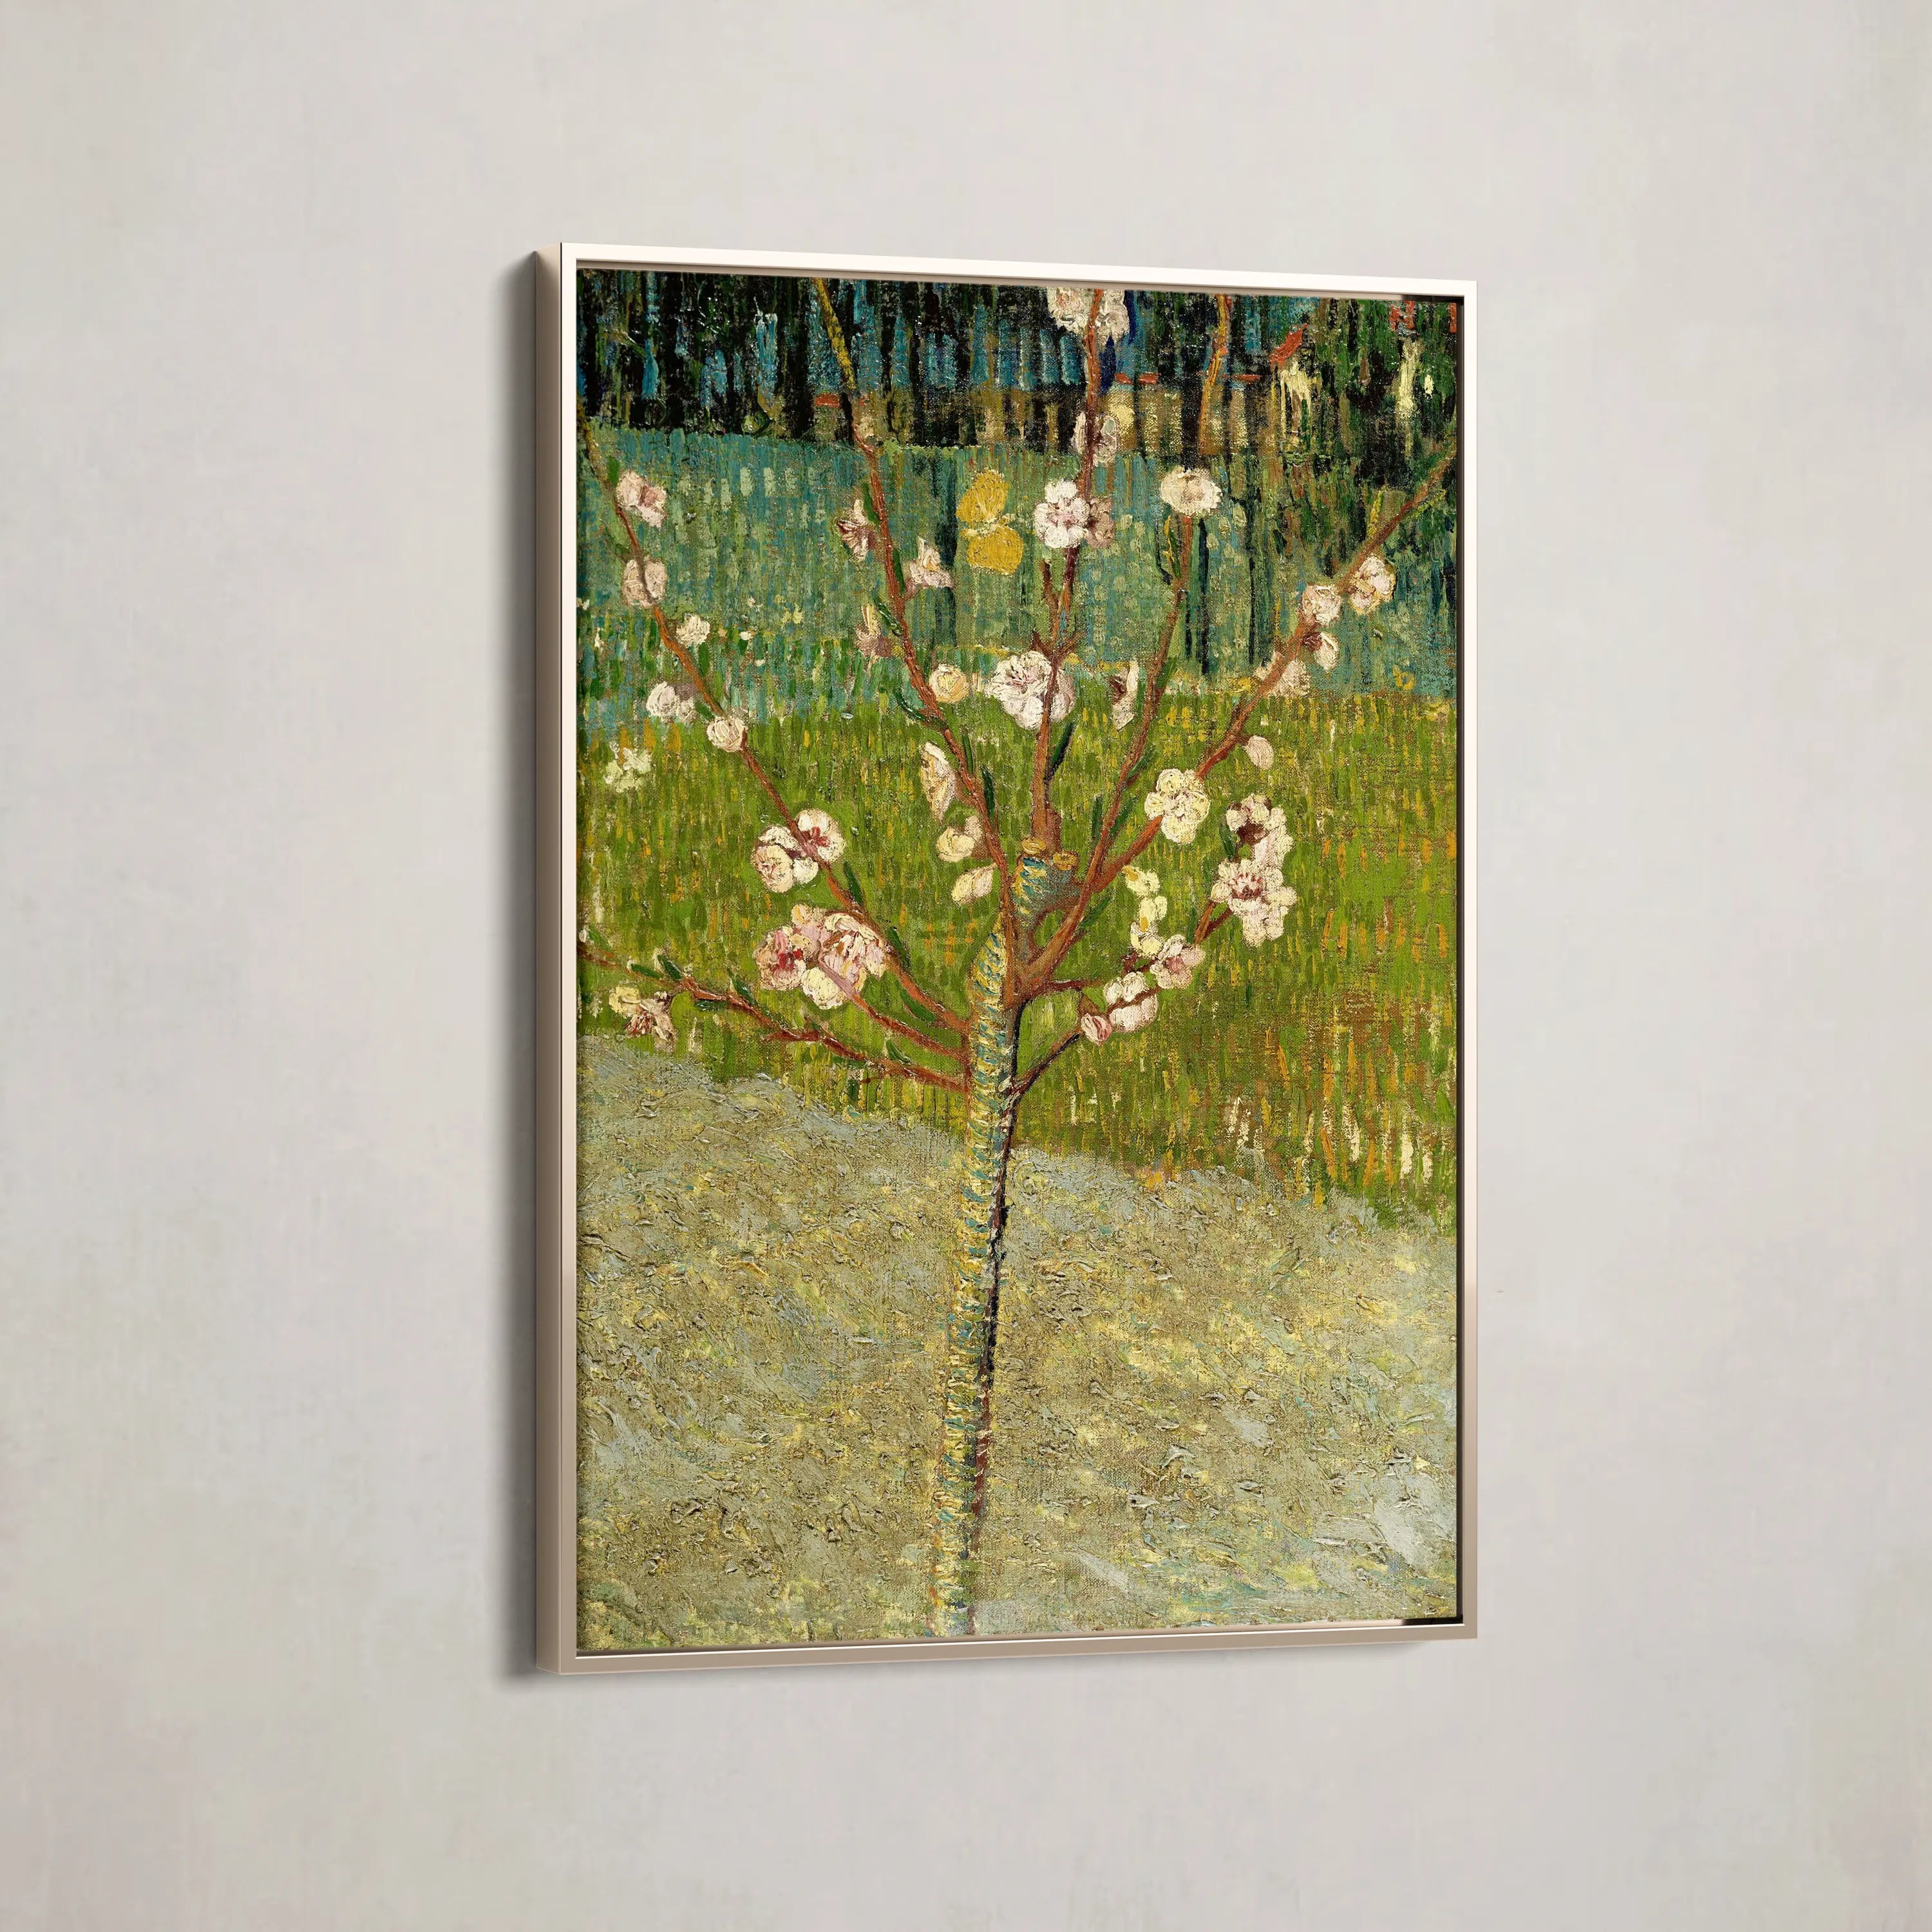 Almond tree in blossom by Vincent van Gogh